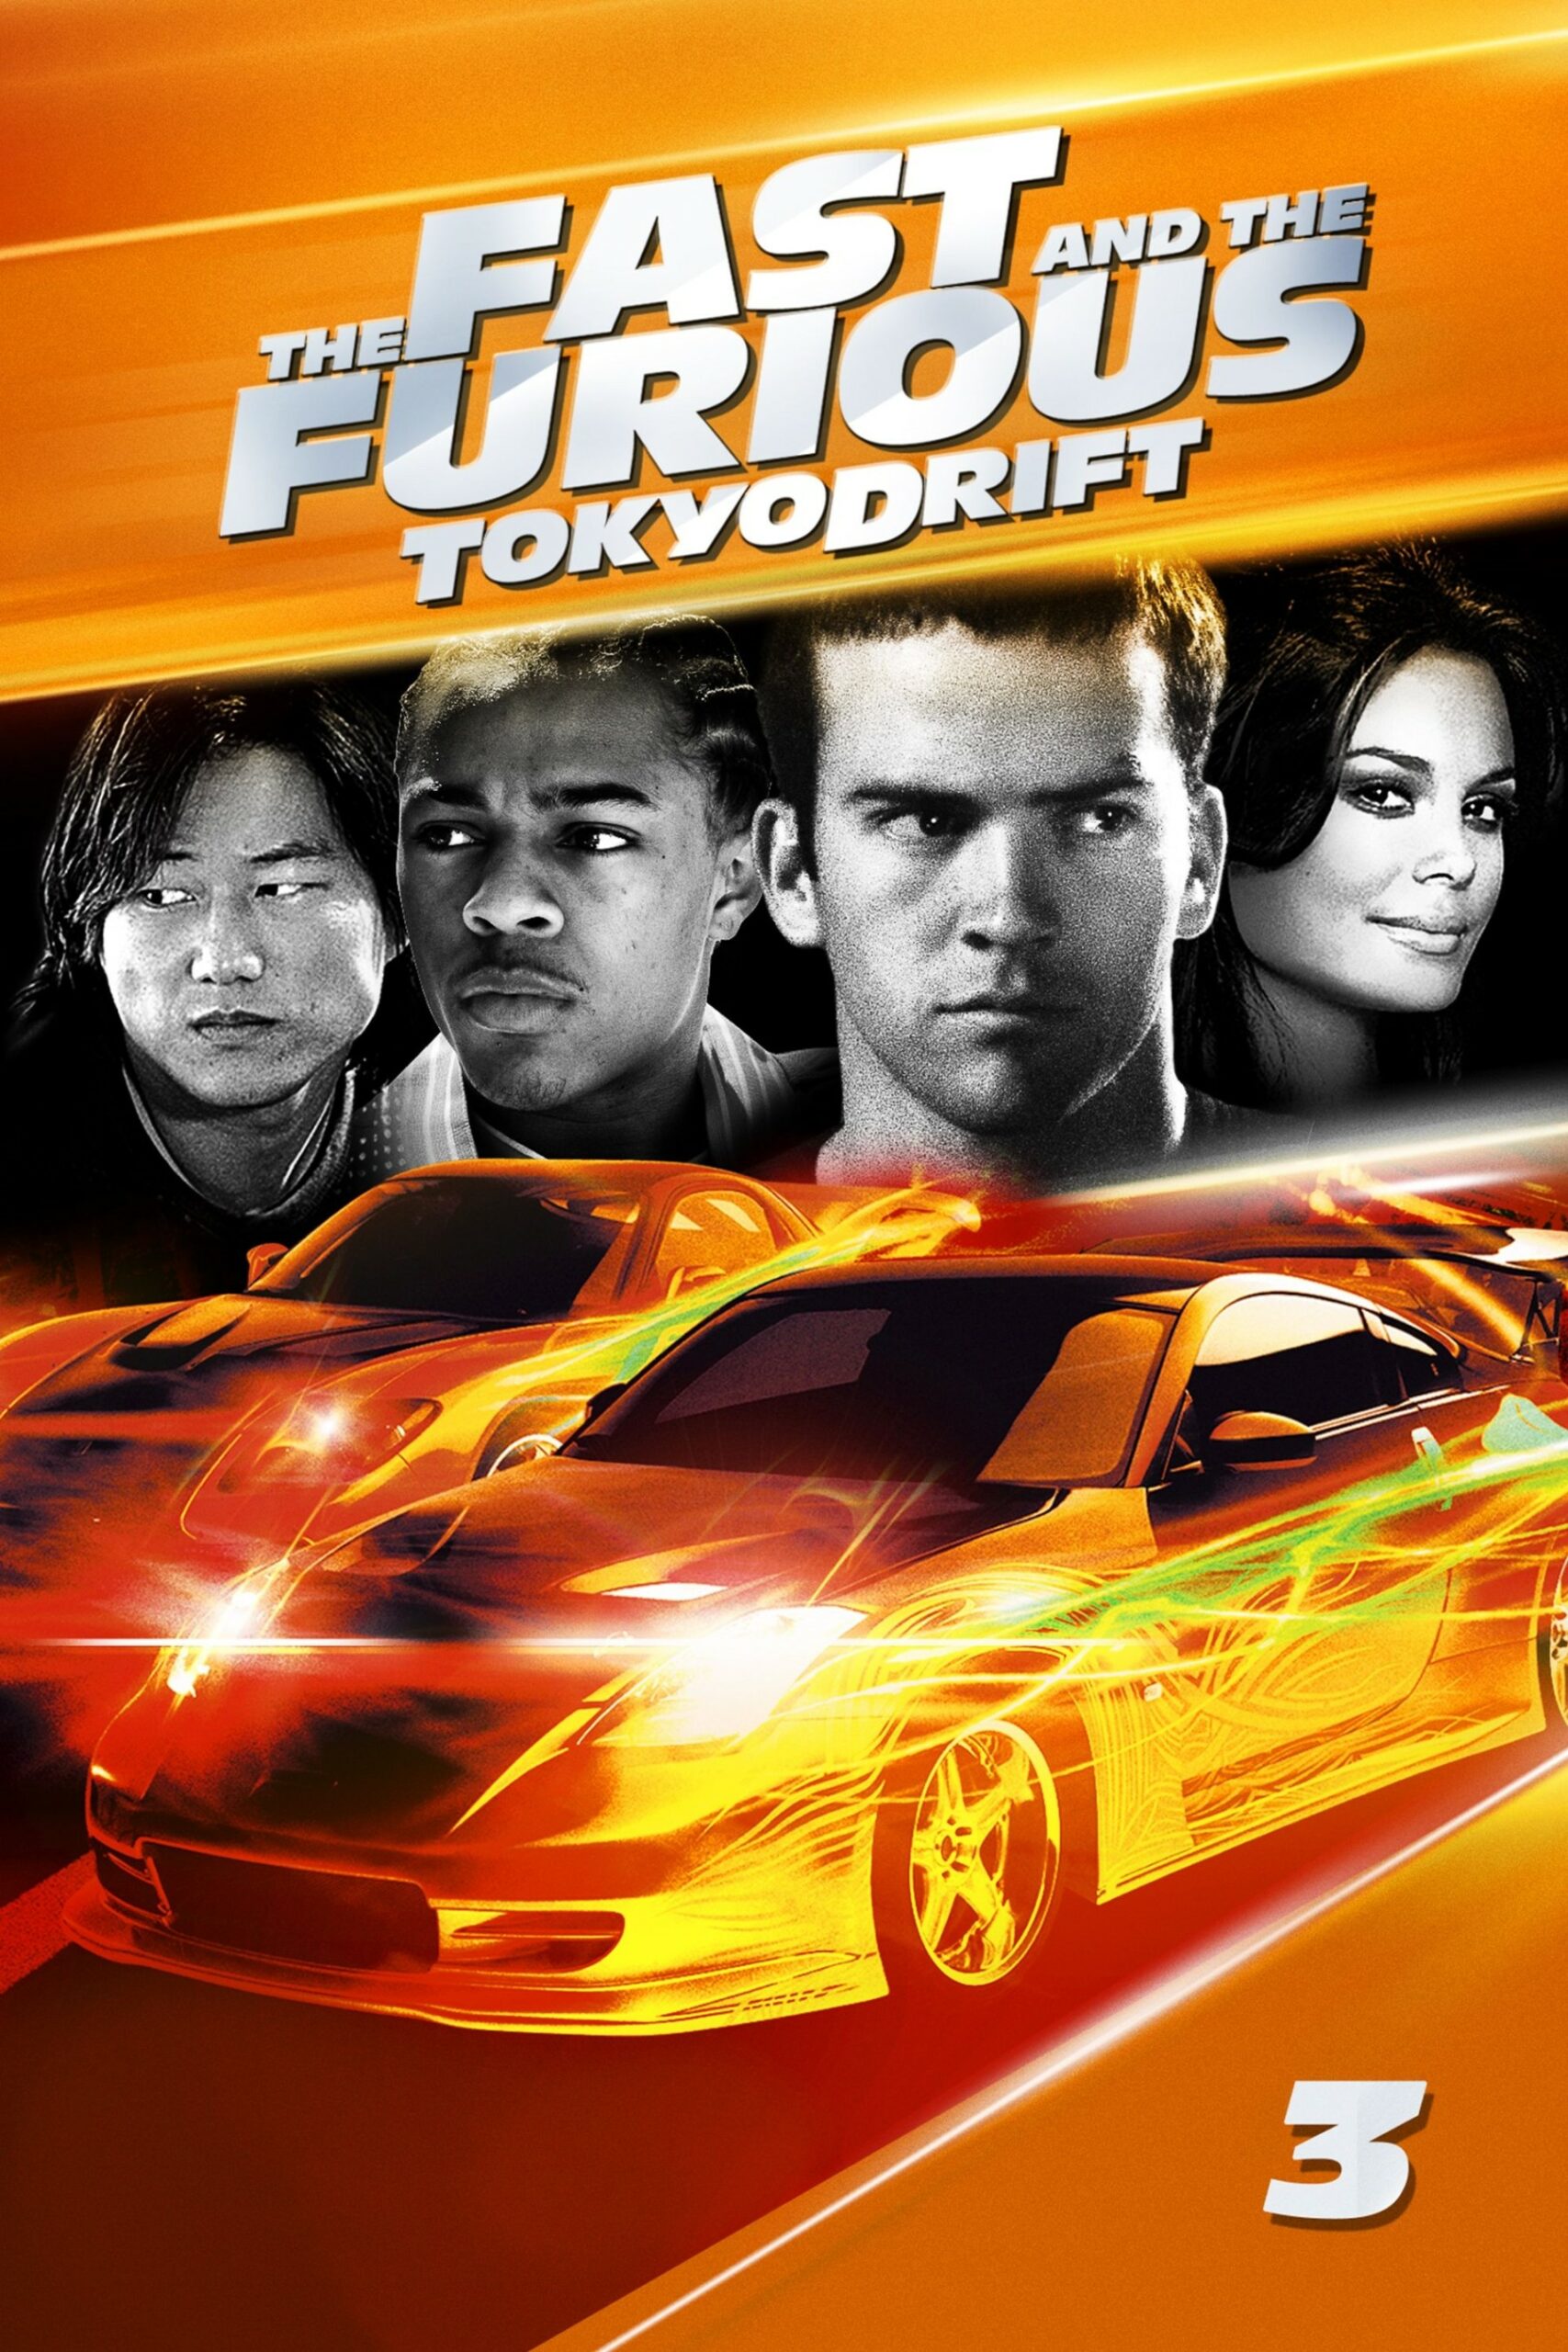 The Fast and the Furious: Tokyo Drift  Full Movie  Movies Anywhere